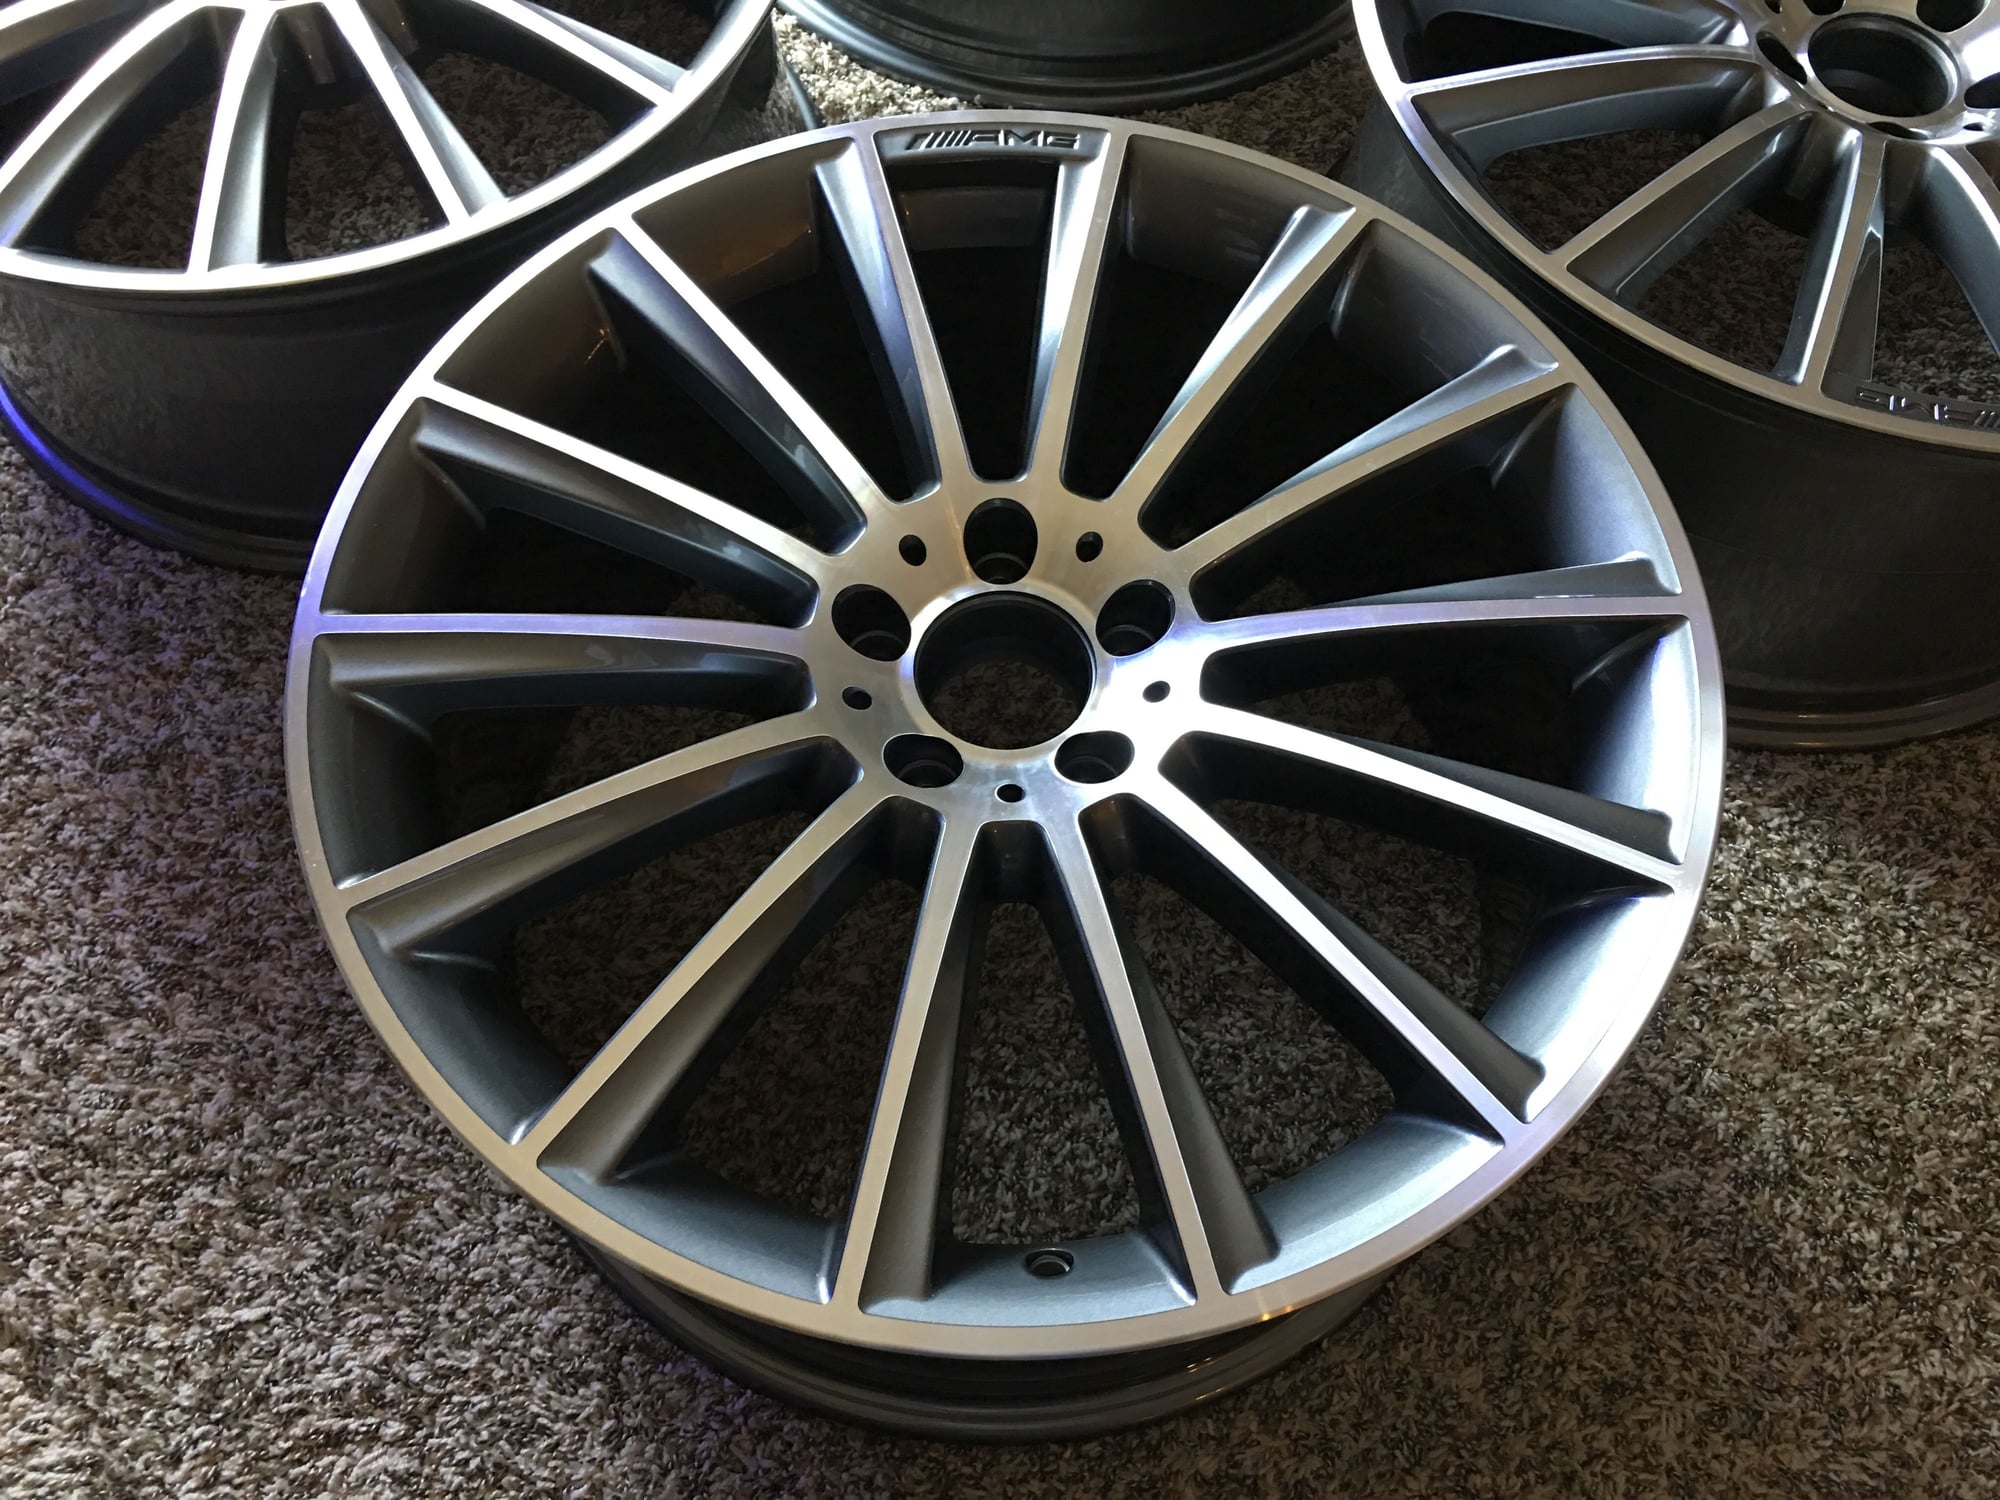 Wheels and Tires/Axles - 20" Mercedes Multi-Spoke AMG wheels - Used - 2013 to 2019 Mercedes-Benz S450 - Los Angeles, CA 91801, United States